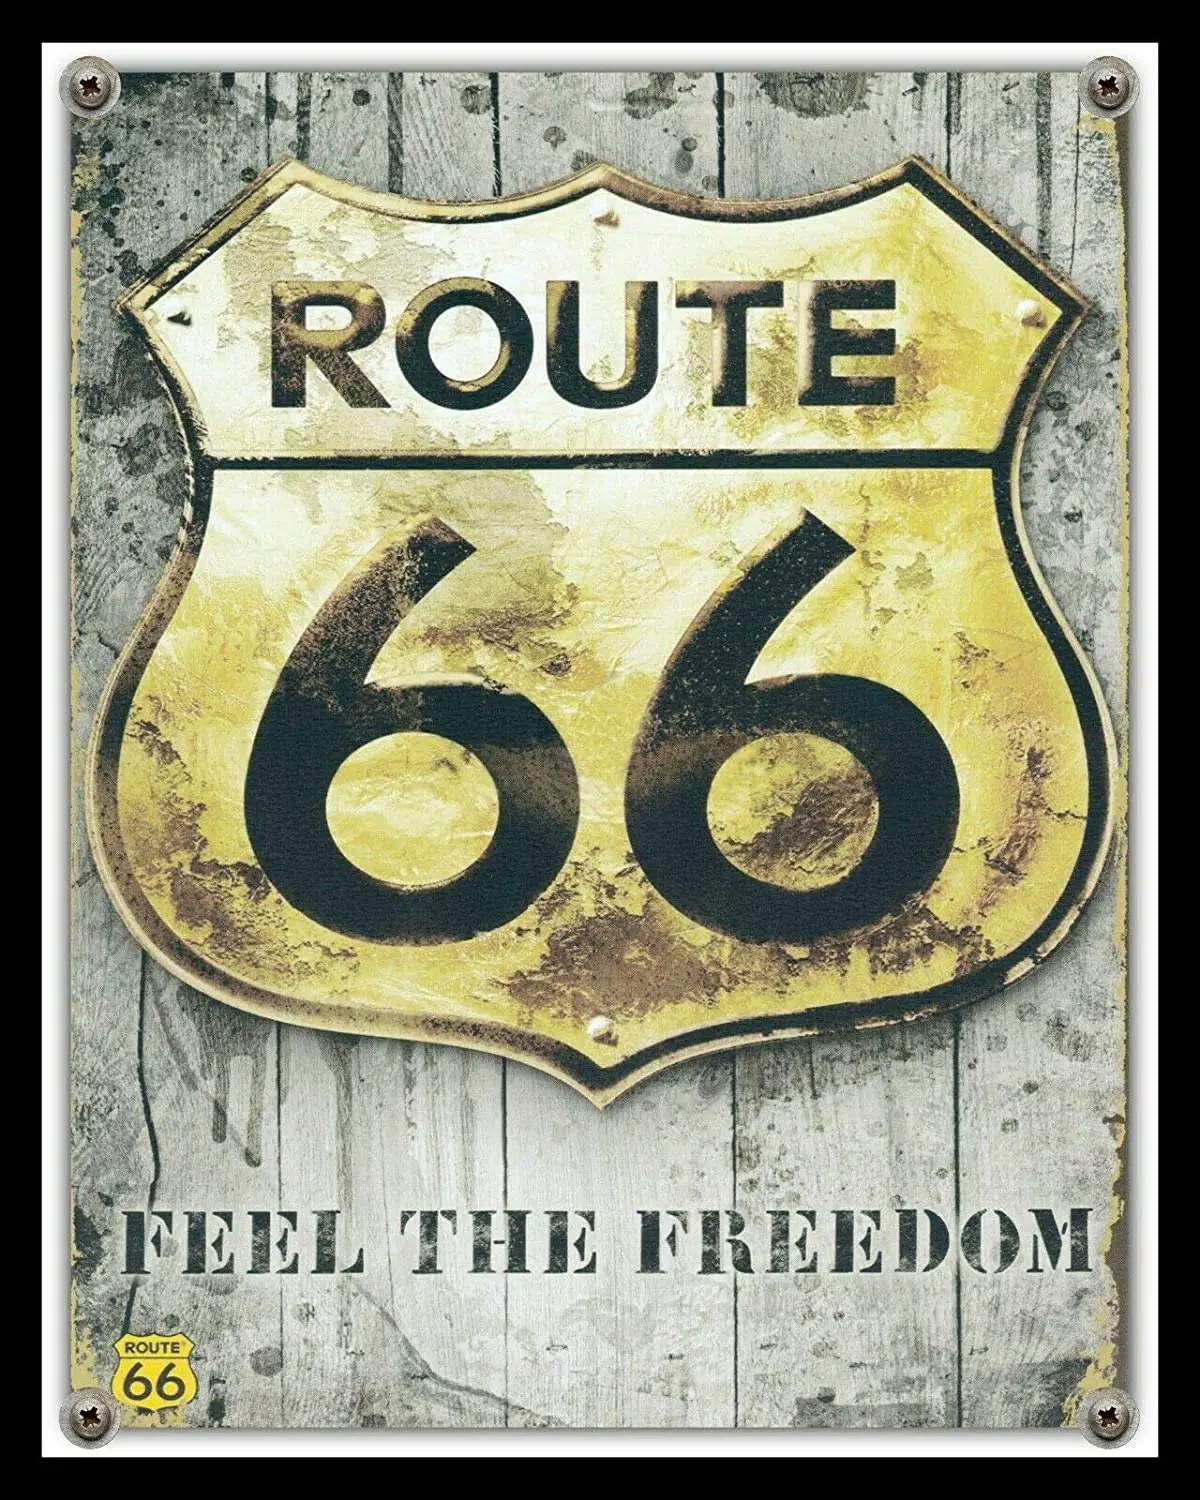 

Route 66 Historic Roadtrip American Highway Metal Sign Retro Wall Home Bar Pub Vintage Cafe Decor, 8x12 Inch